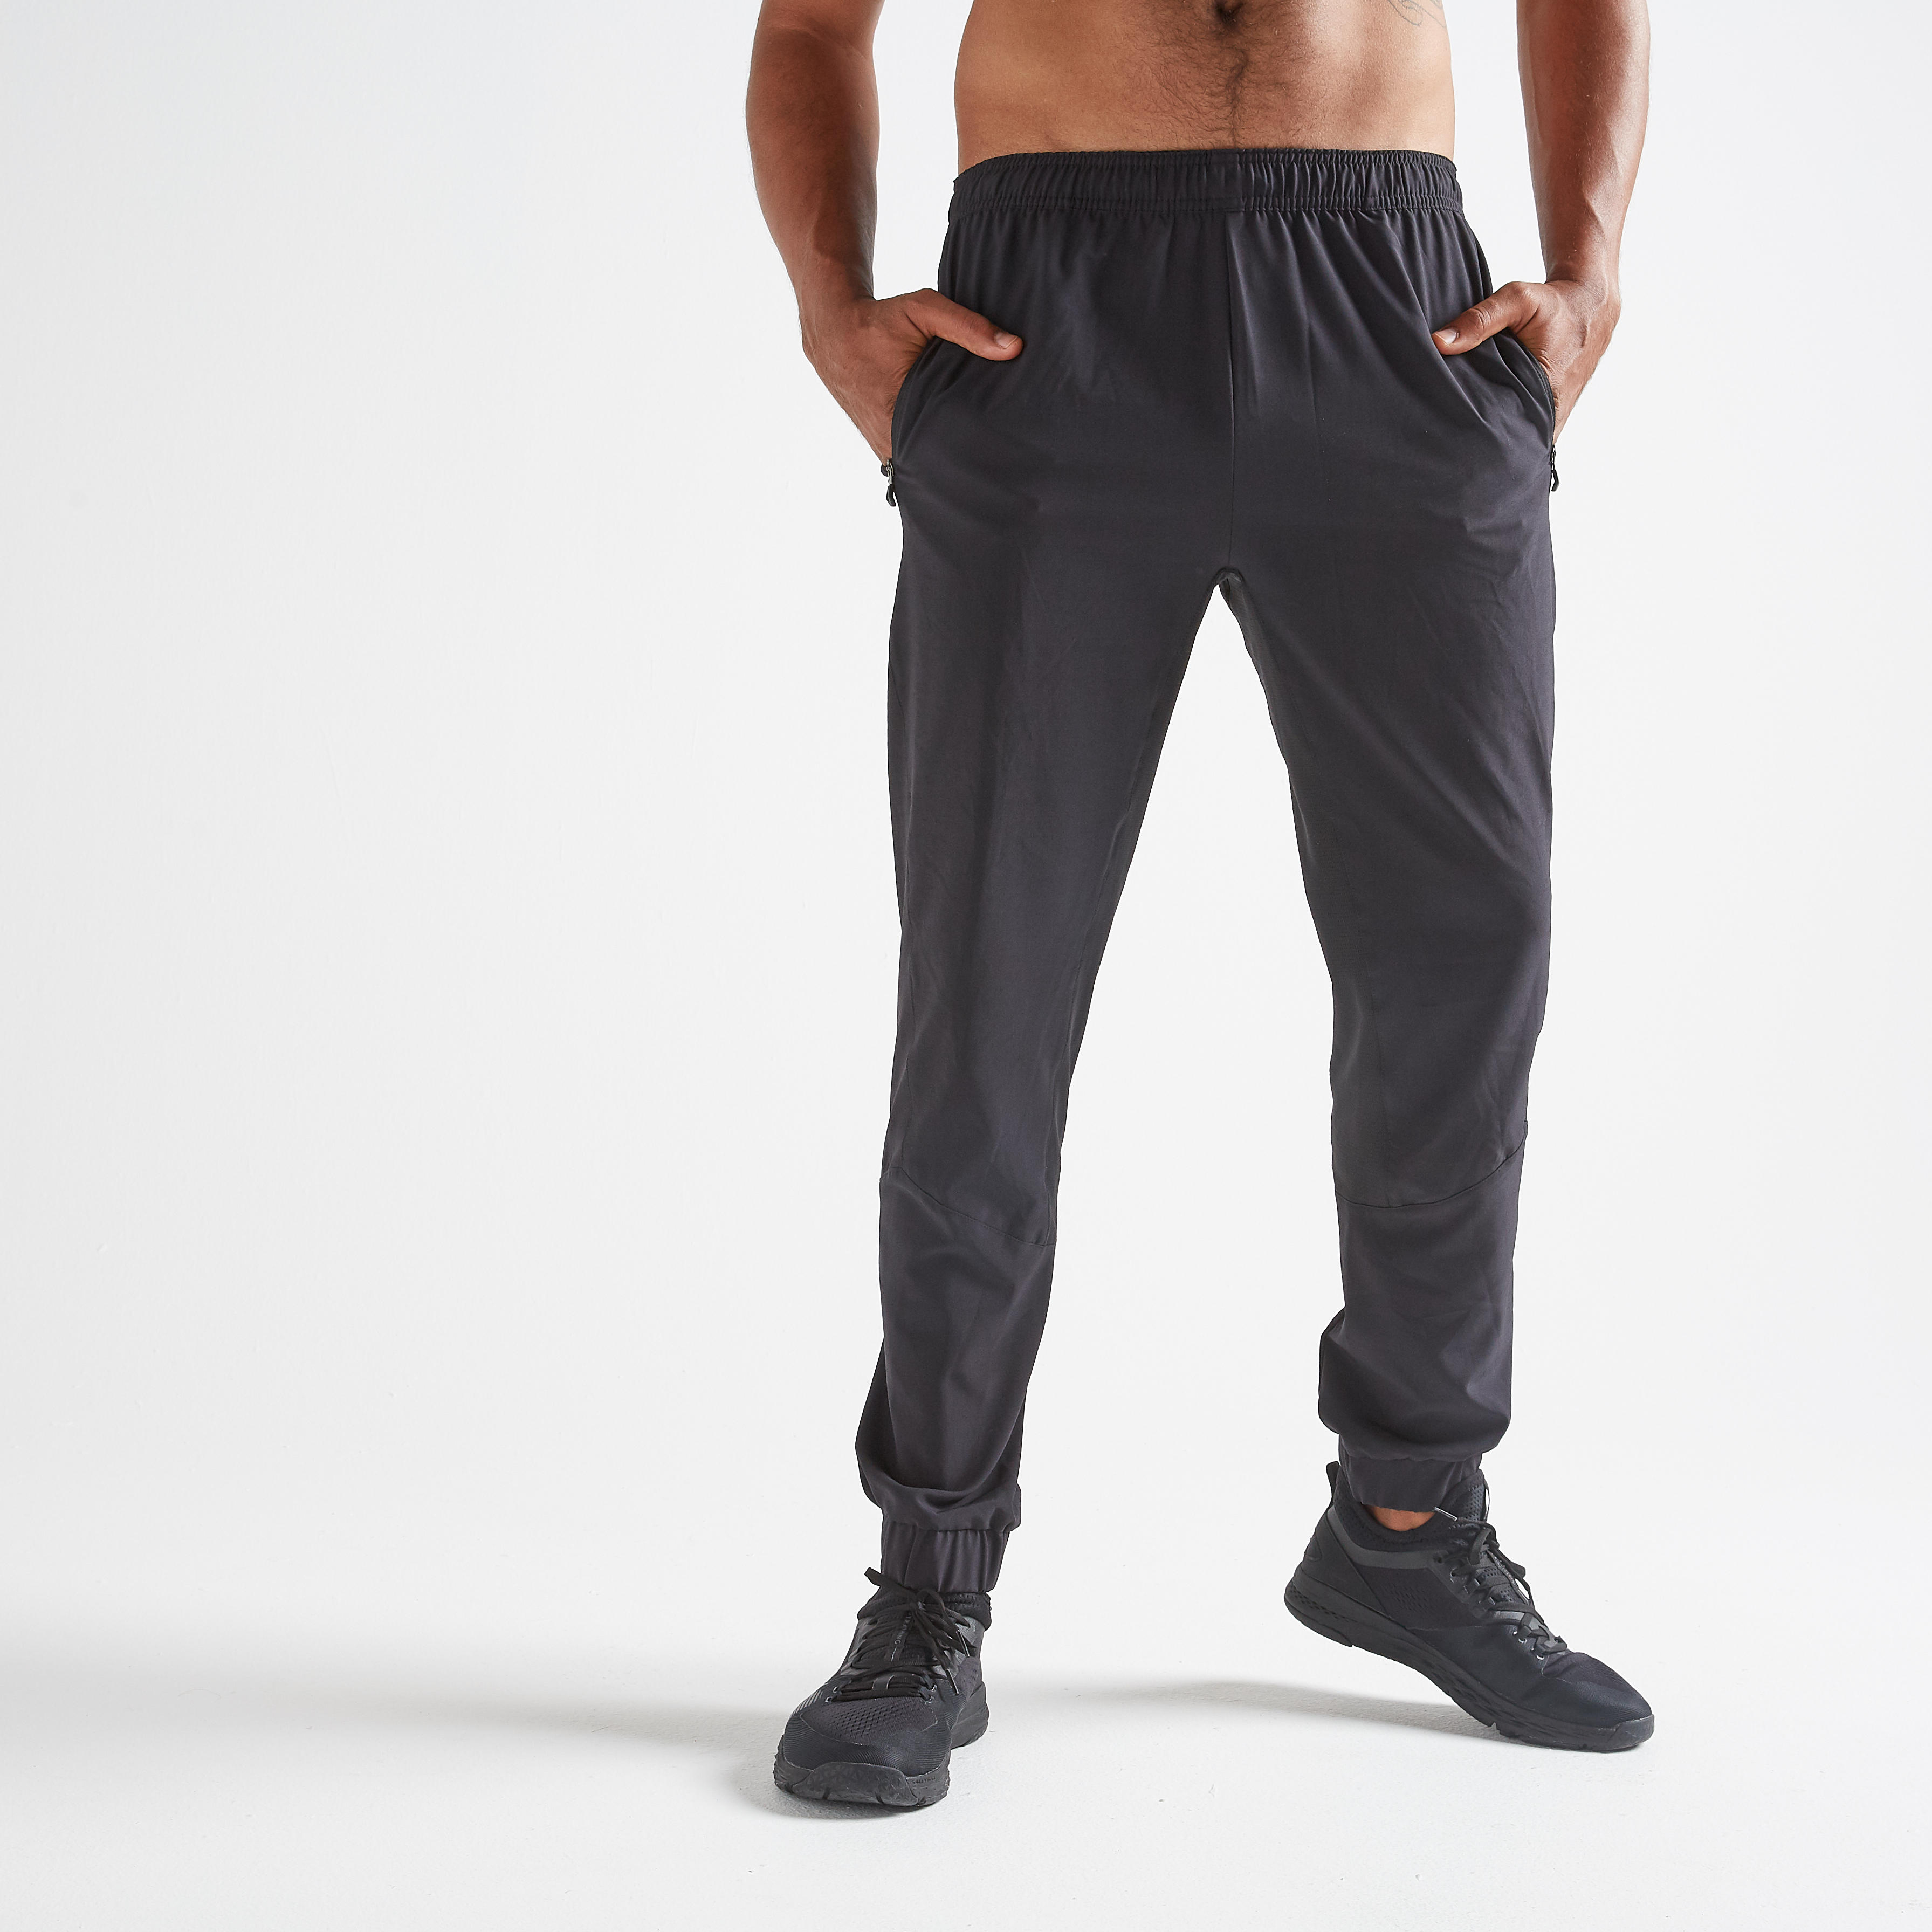 Workout Clothes online at Decathlon India